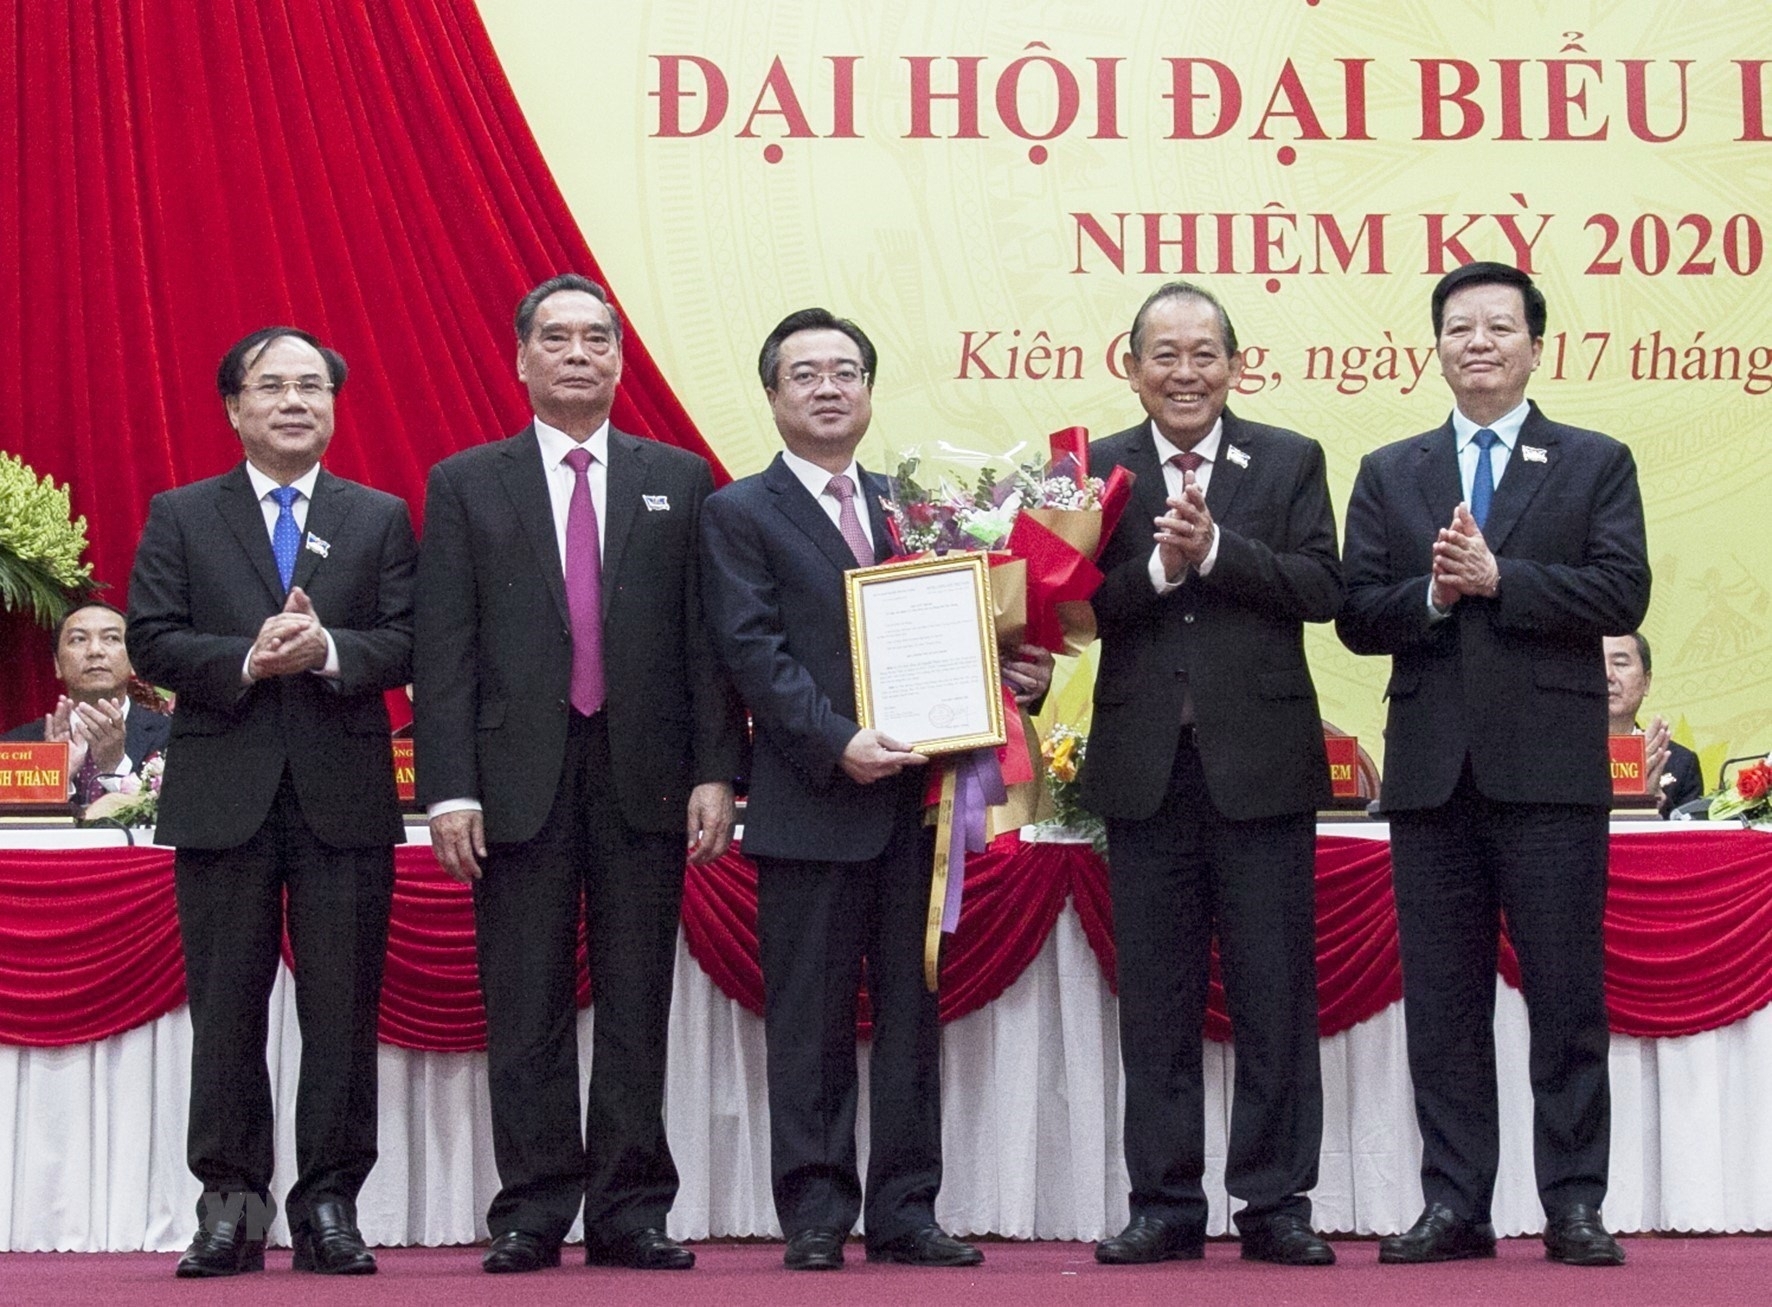 awarding decision to appoint deputy minister of construction to mr nguyen thanh nghi